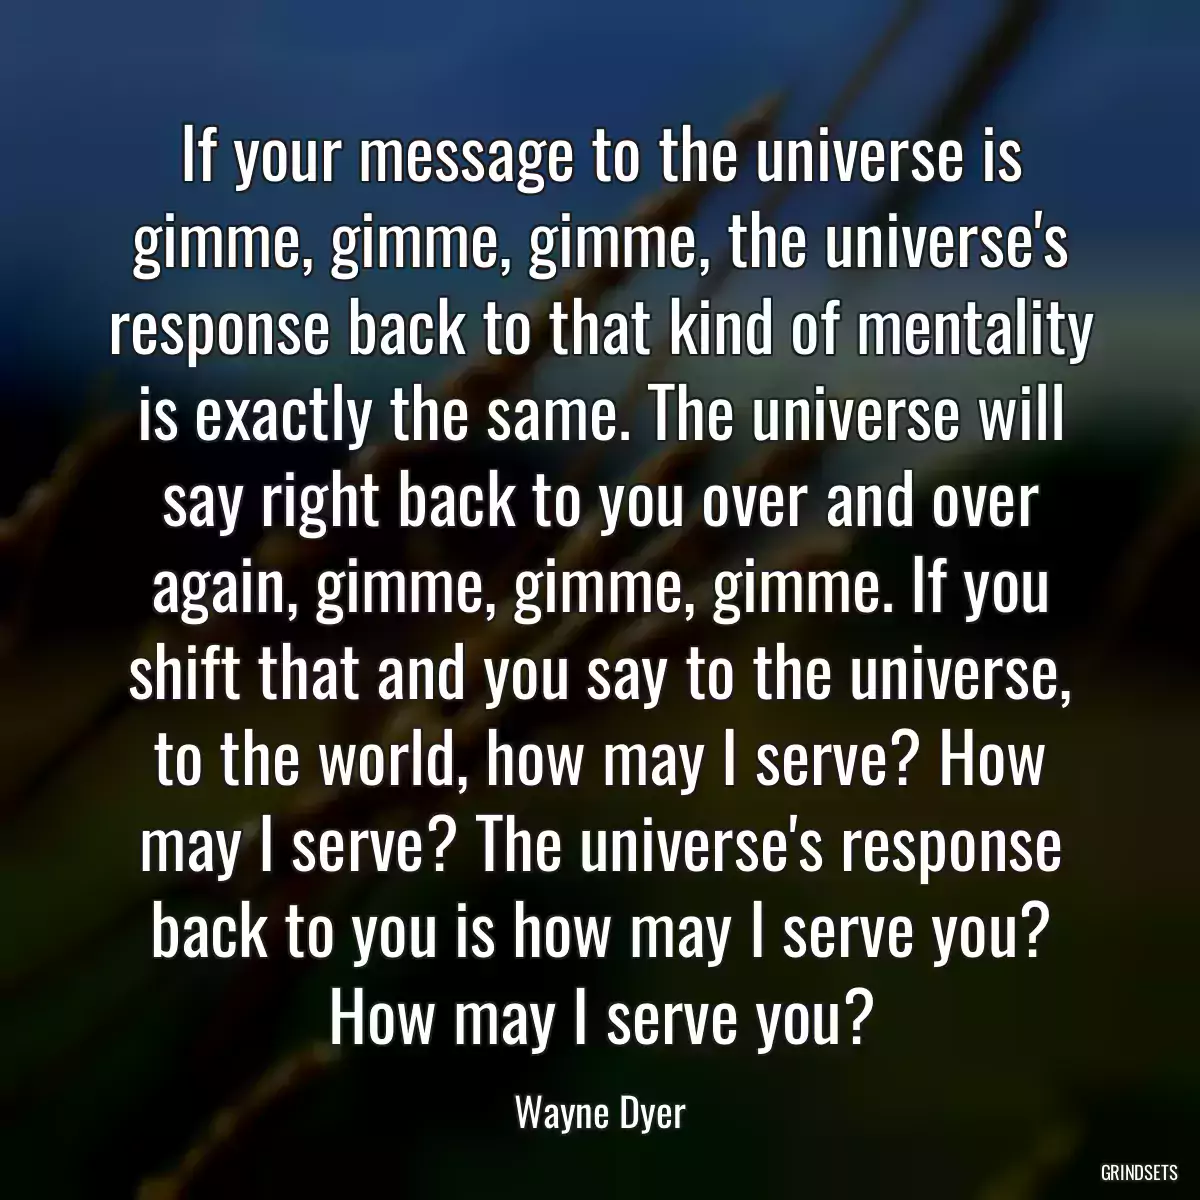 If your message to the universe is gimme, gimme, gimme, the universe\'s response back to that kind of mentality is exactly the same. The universe will say right back to you over and over again, gimme, gimme, gimme. If you shift that and you say to the universe, to the world, how may I serve? How may I serve? The universe\'s response back to you is how may I serve you? How may I serve you?